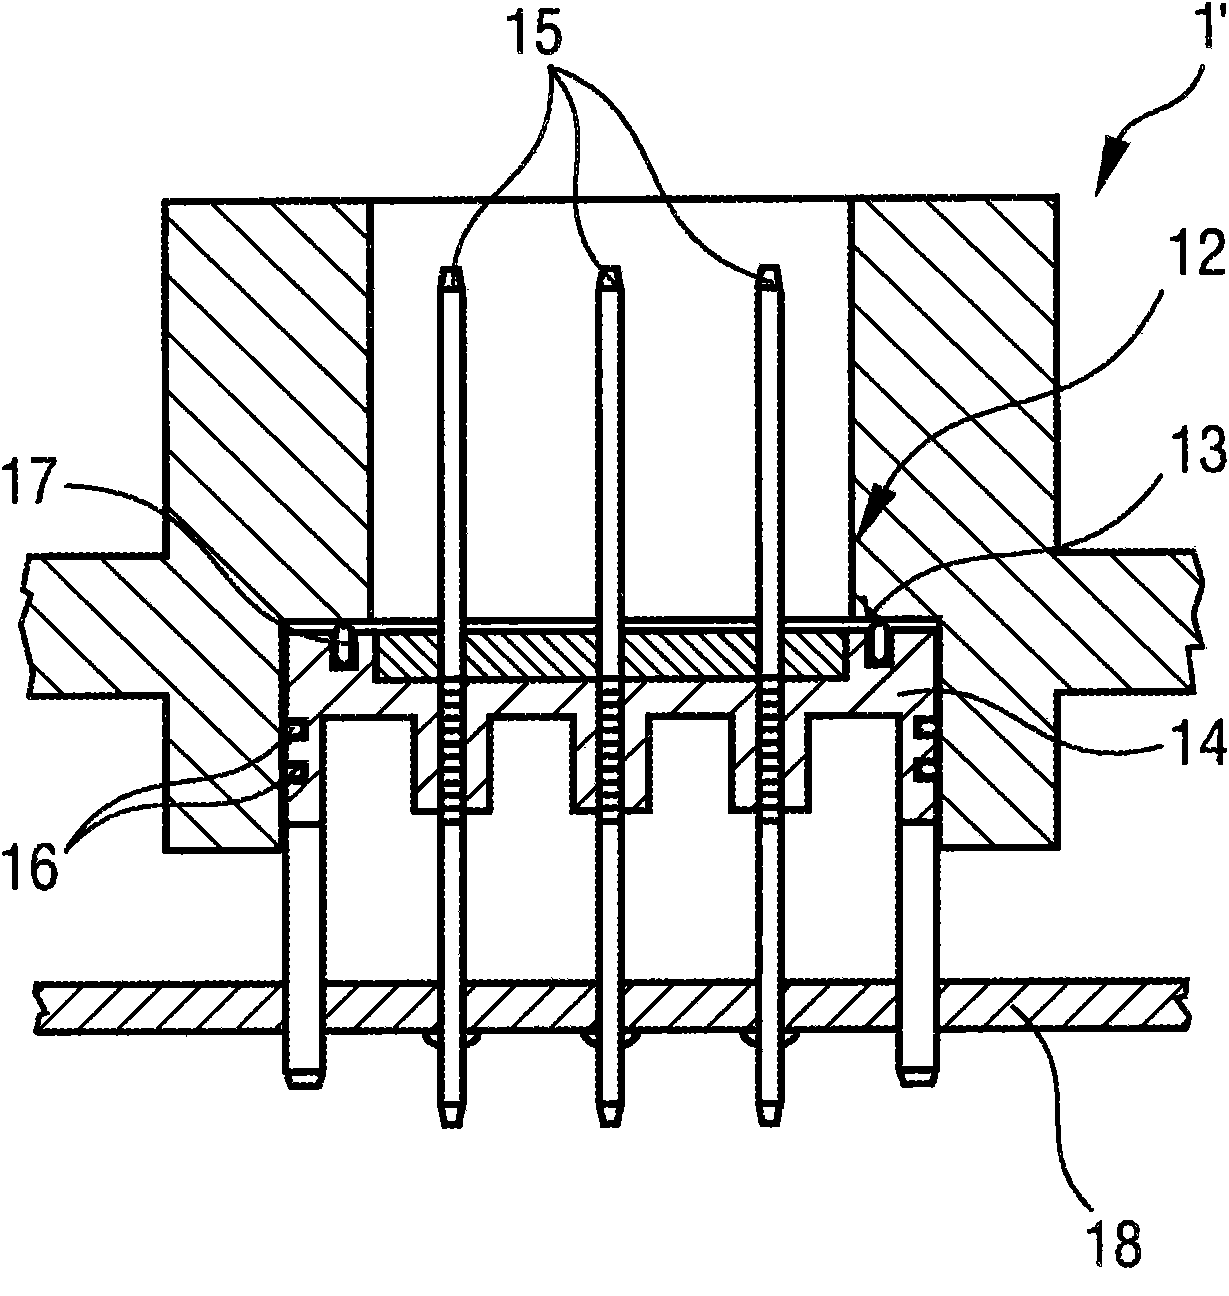 Plug-type connection for making contact with an electrical printed circuit board which is arranged in a housing